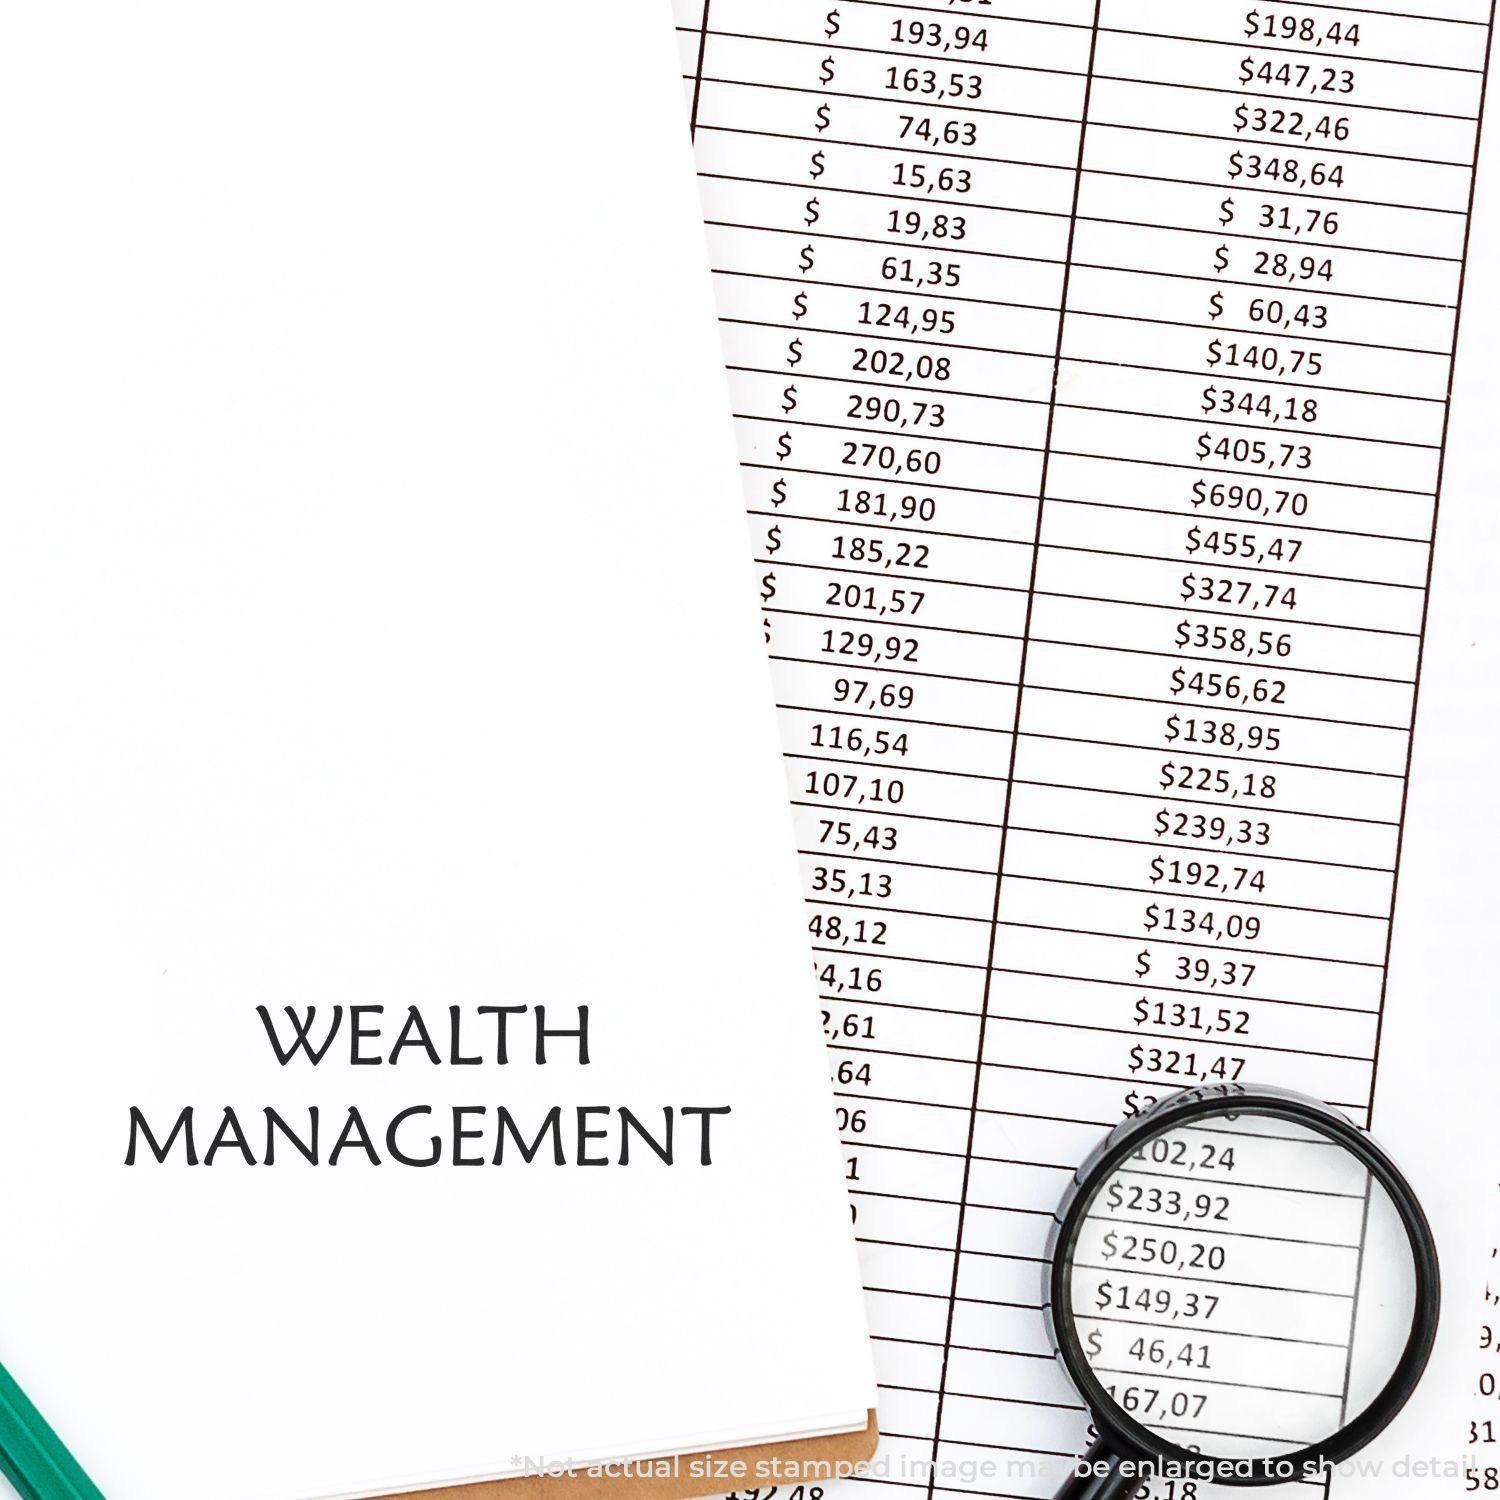 A stock office rubber stamp with a stamped image showing how the text "WEALTH MANAGEMENT" is displayed after stamping.